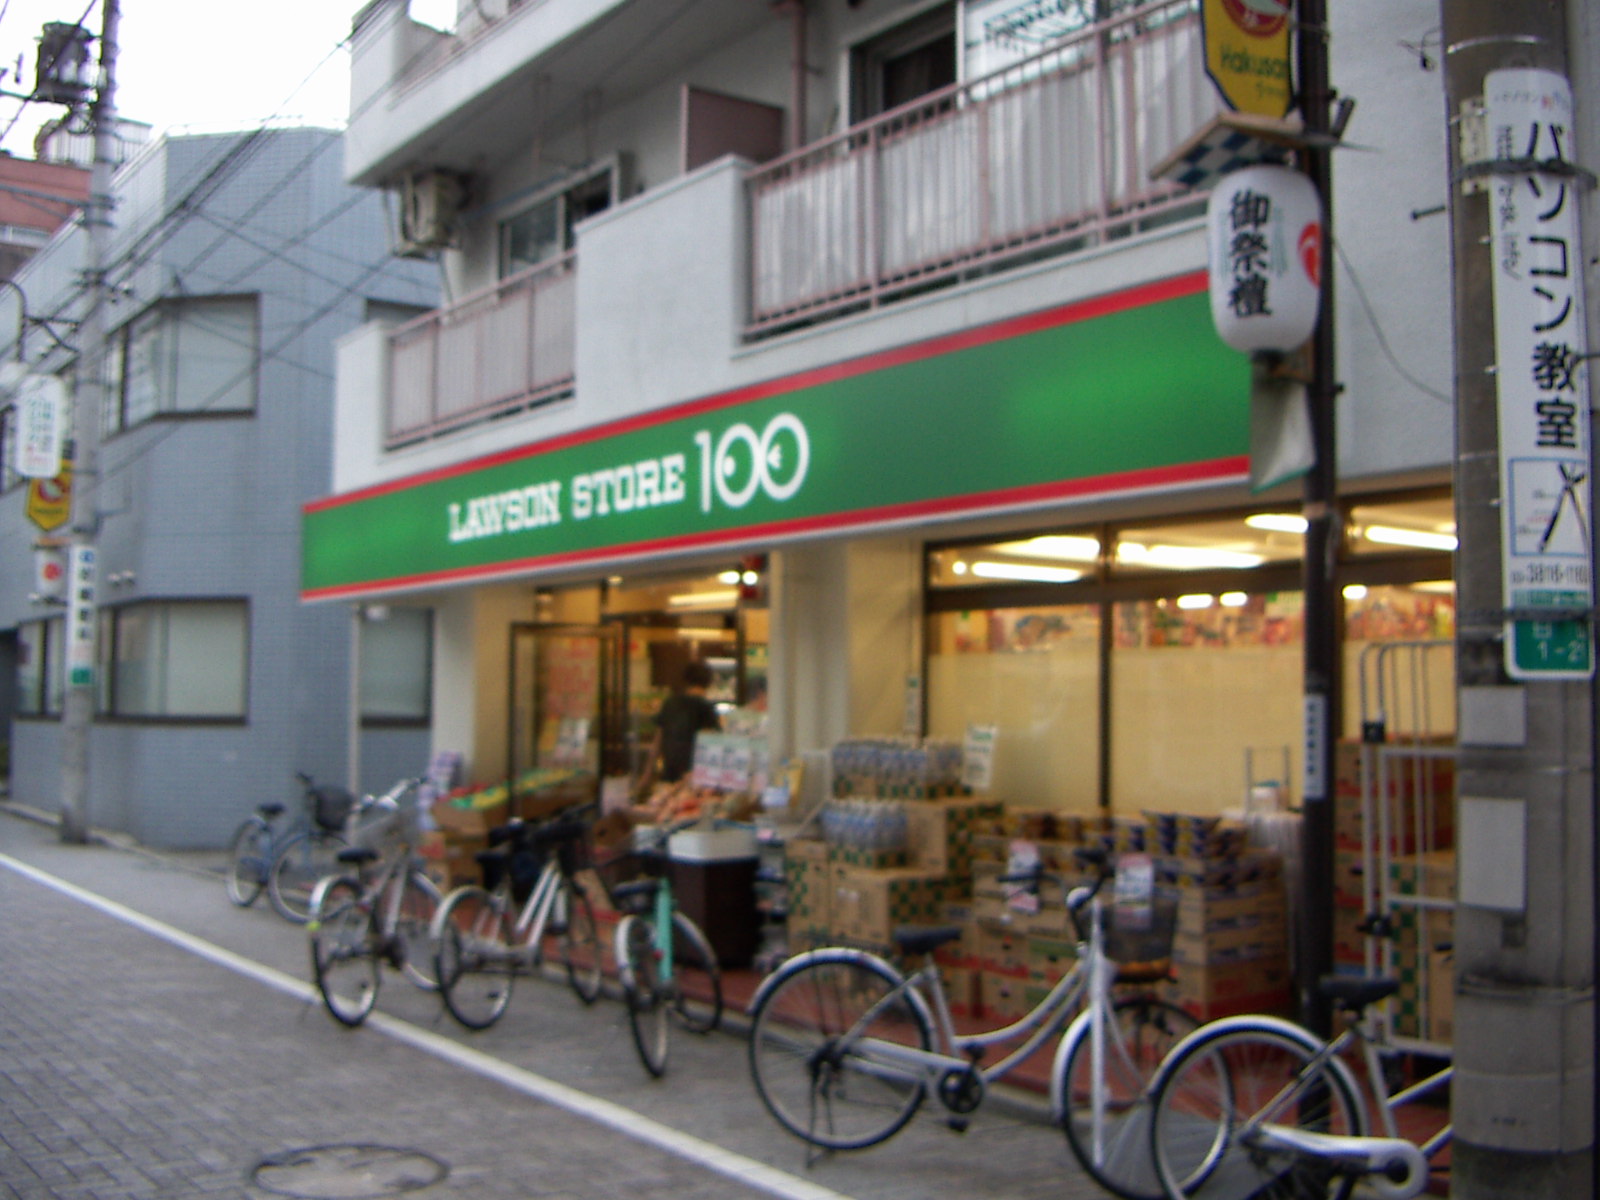 Convenience store. Lawson Store 100 374m to Bunkyo Hakusan-chome store (convenience store)